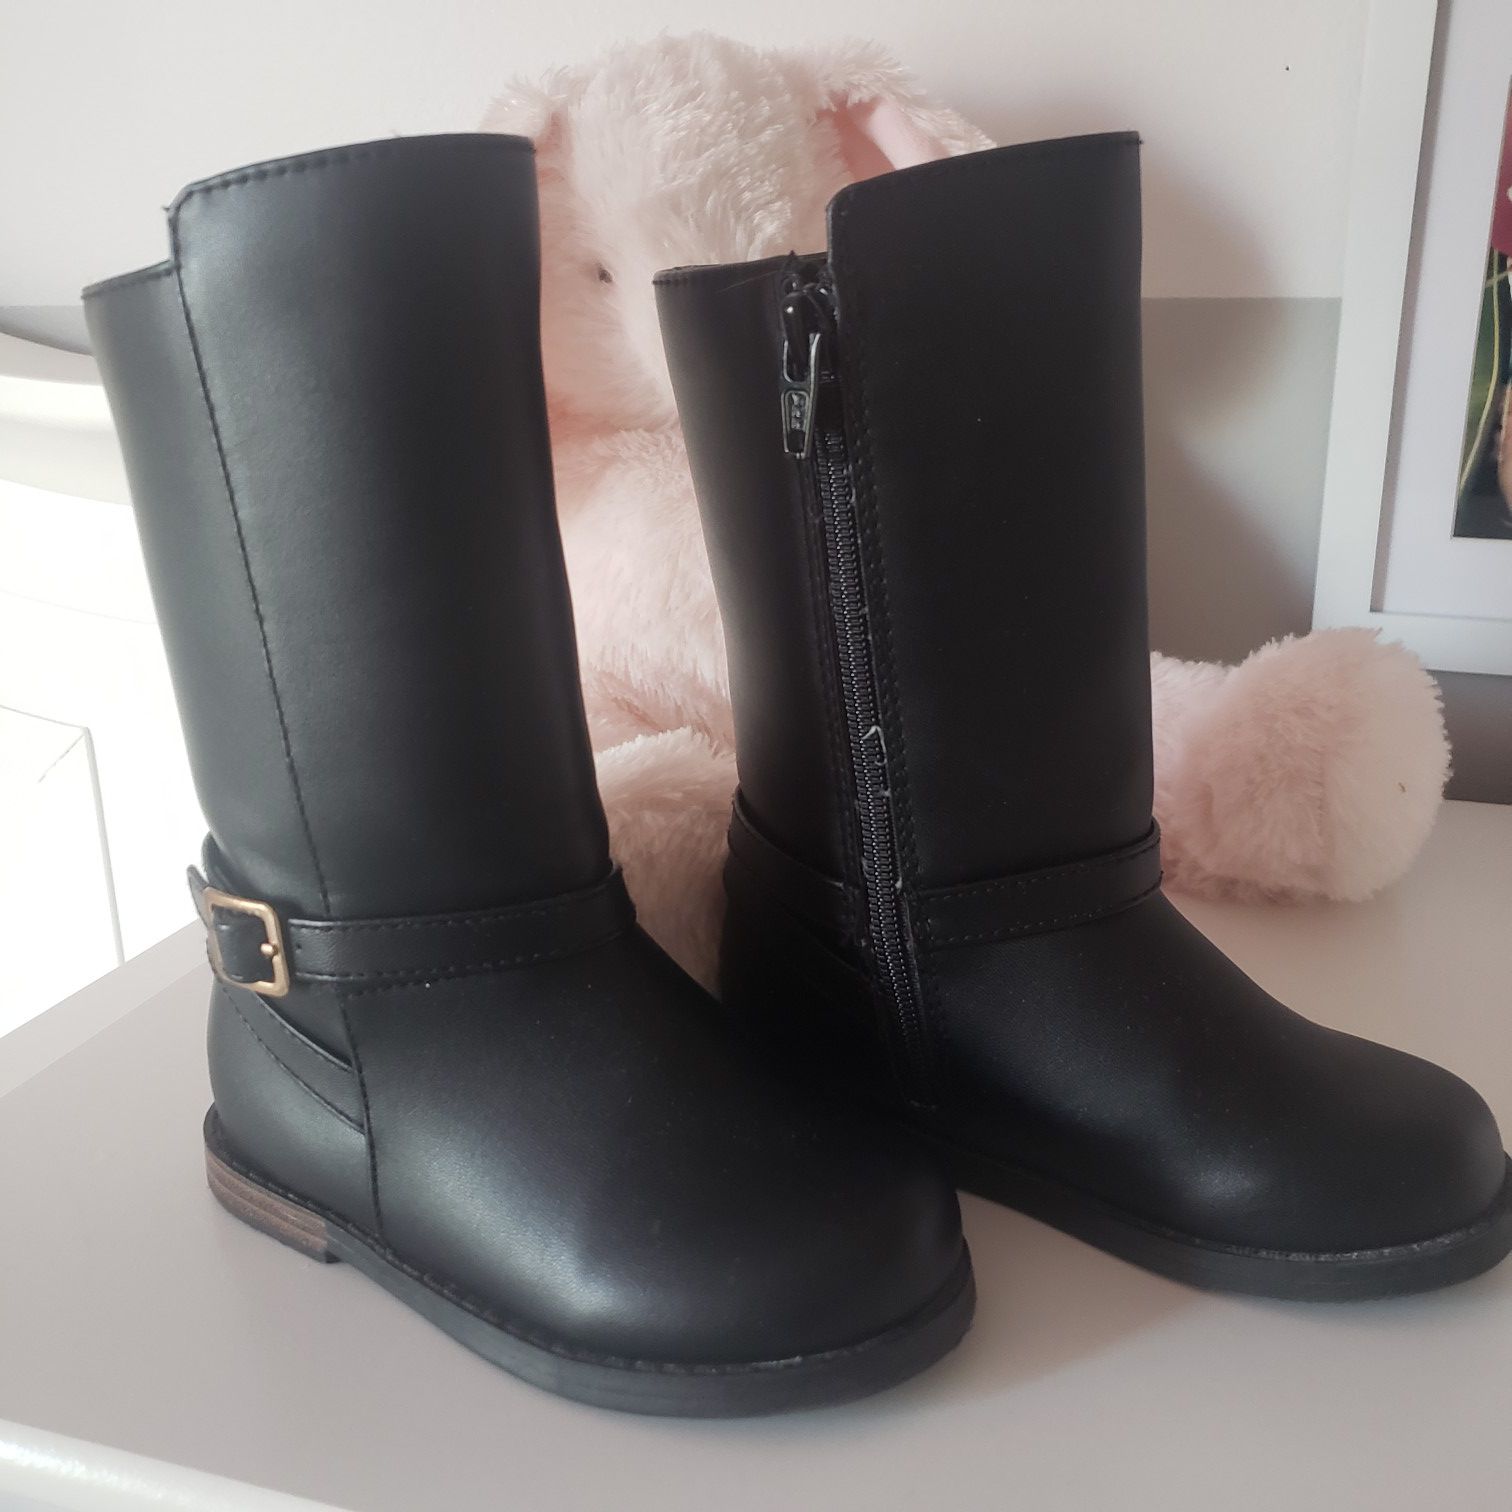 Toddler girl boots size 8